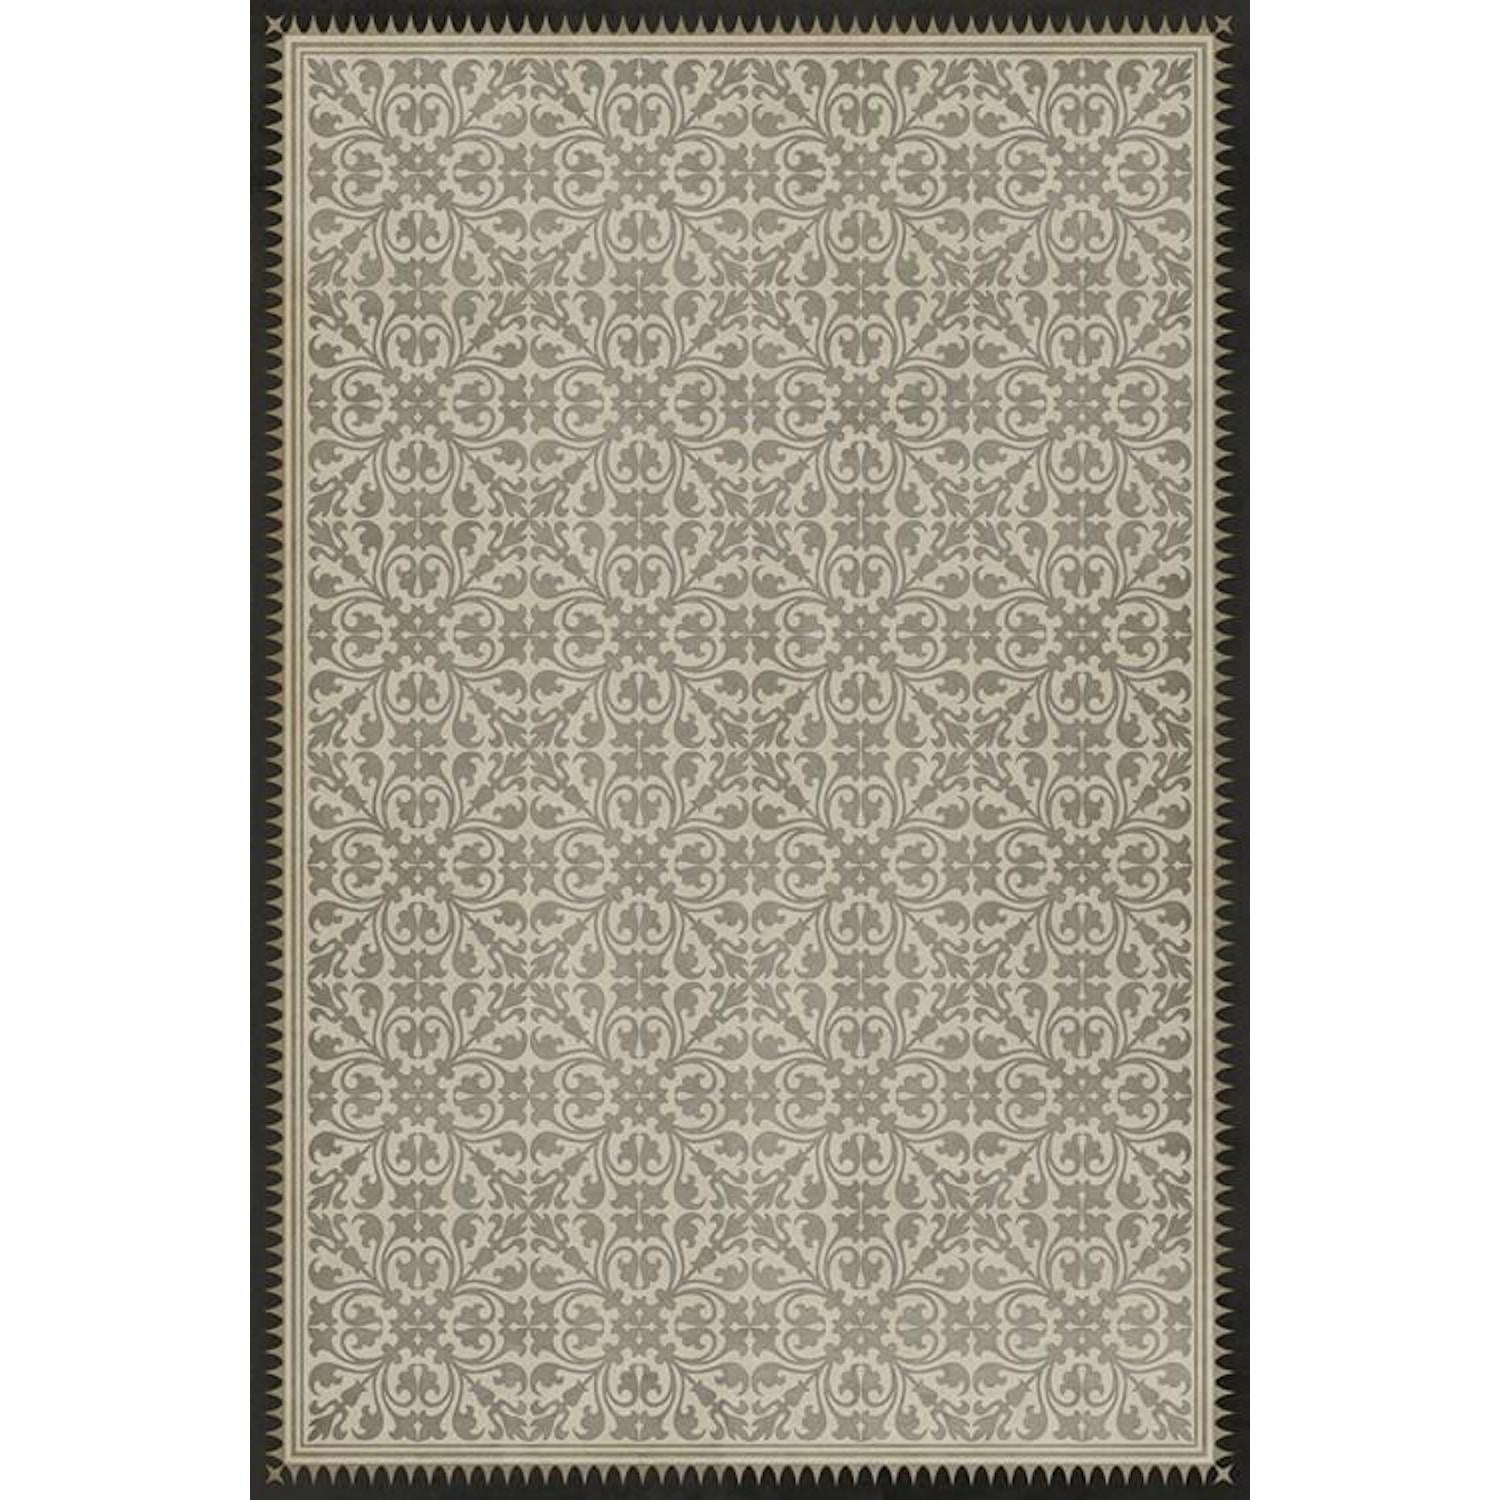 Traditional nonslip The White Knight Vinyl Rug - Pattern 21 with ornate floral design and a dark bordered edge by Spicher and Company.